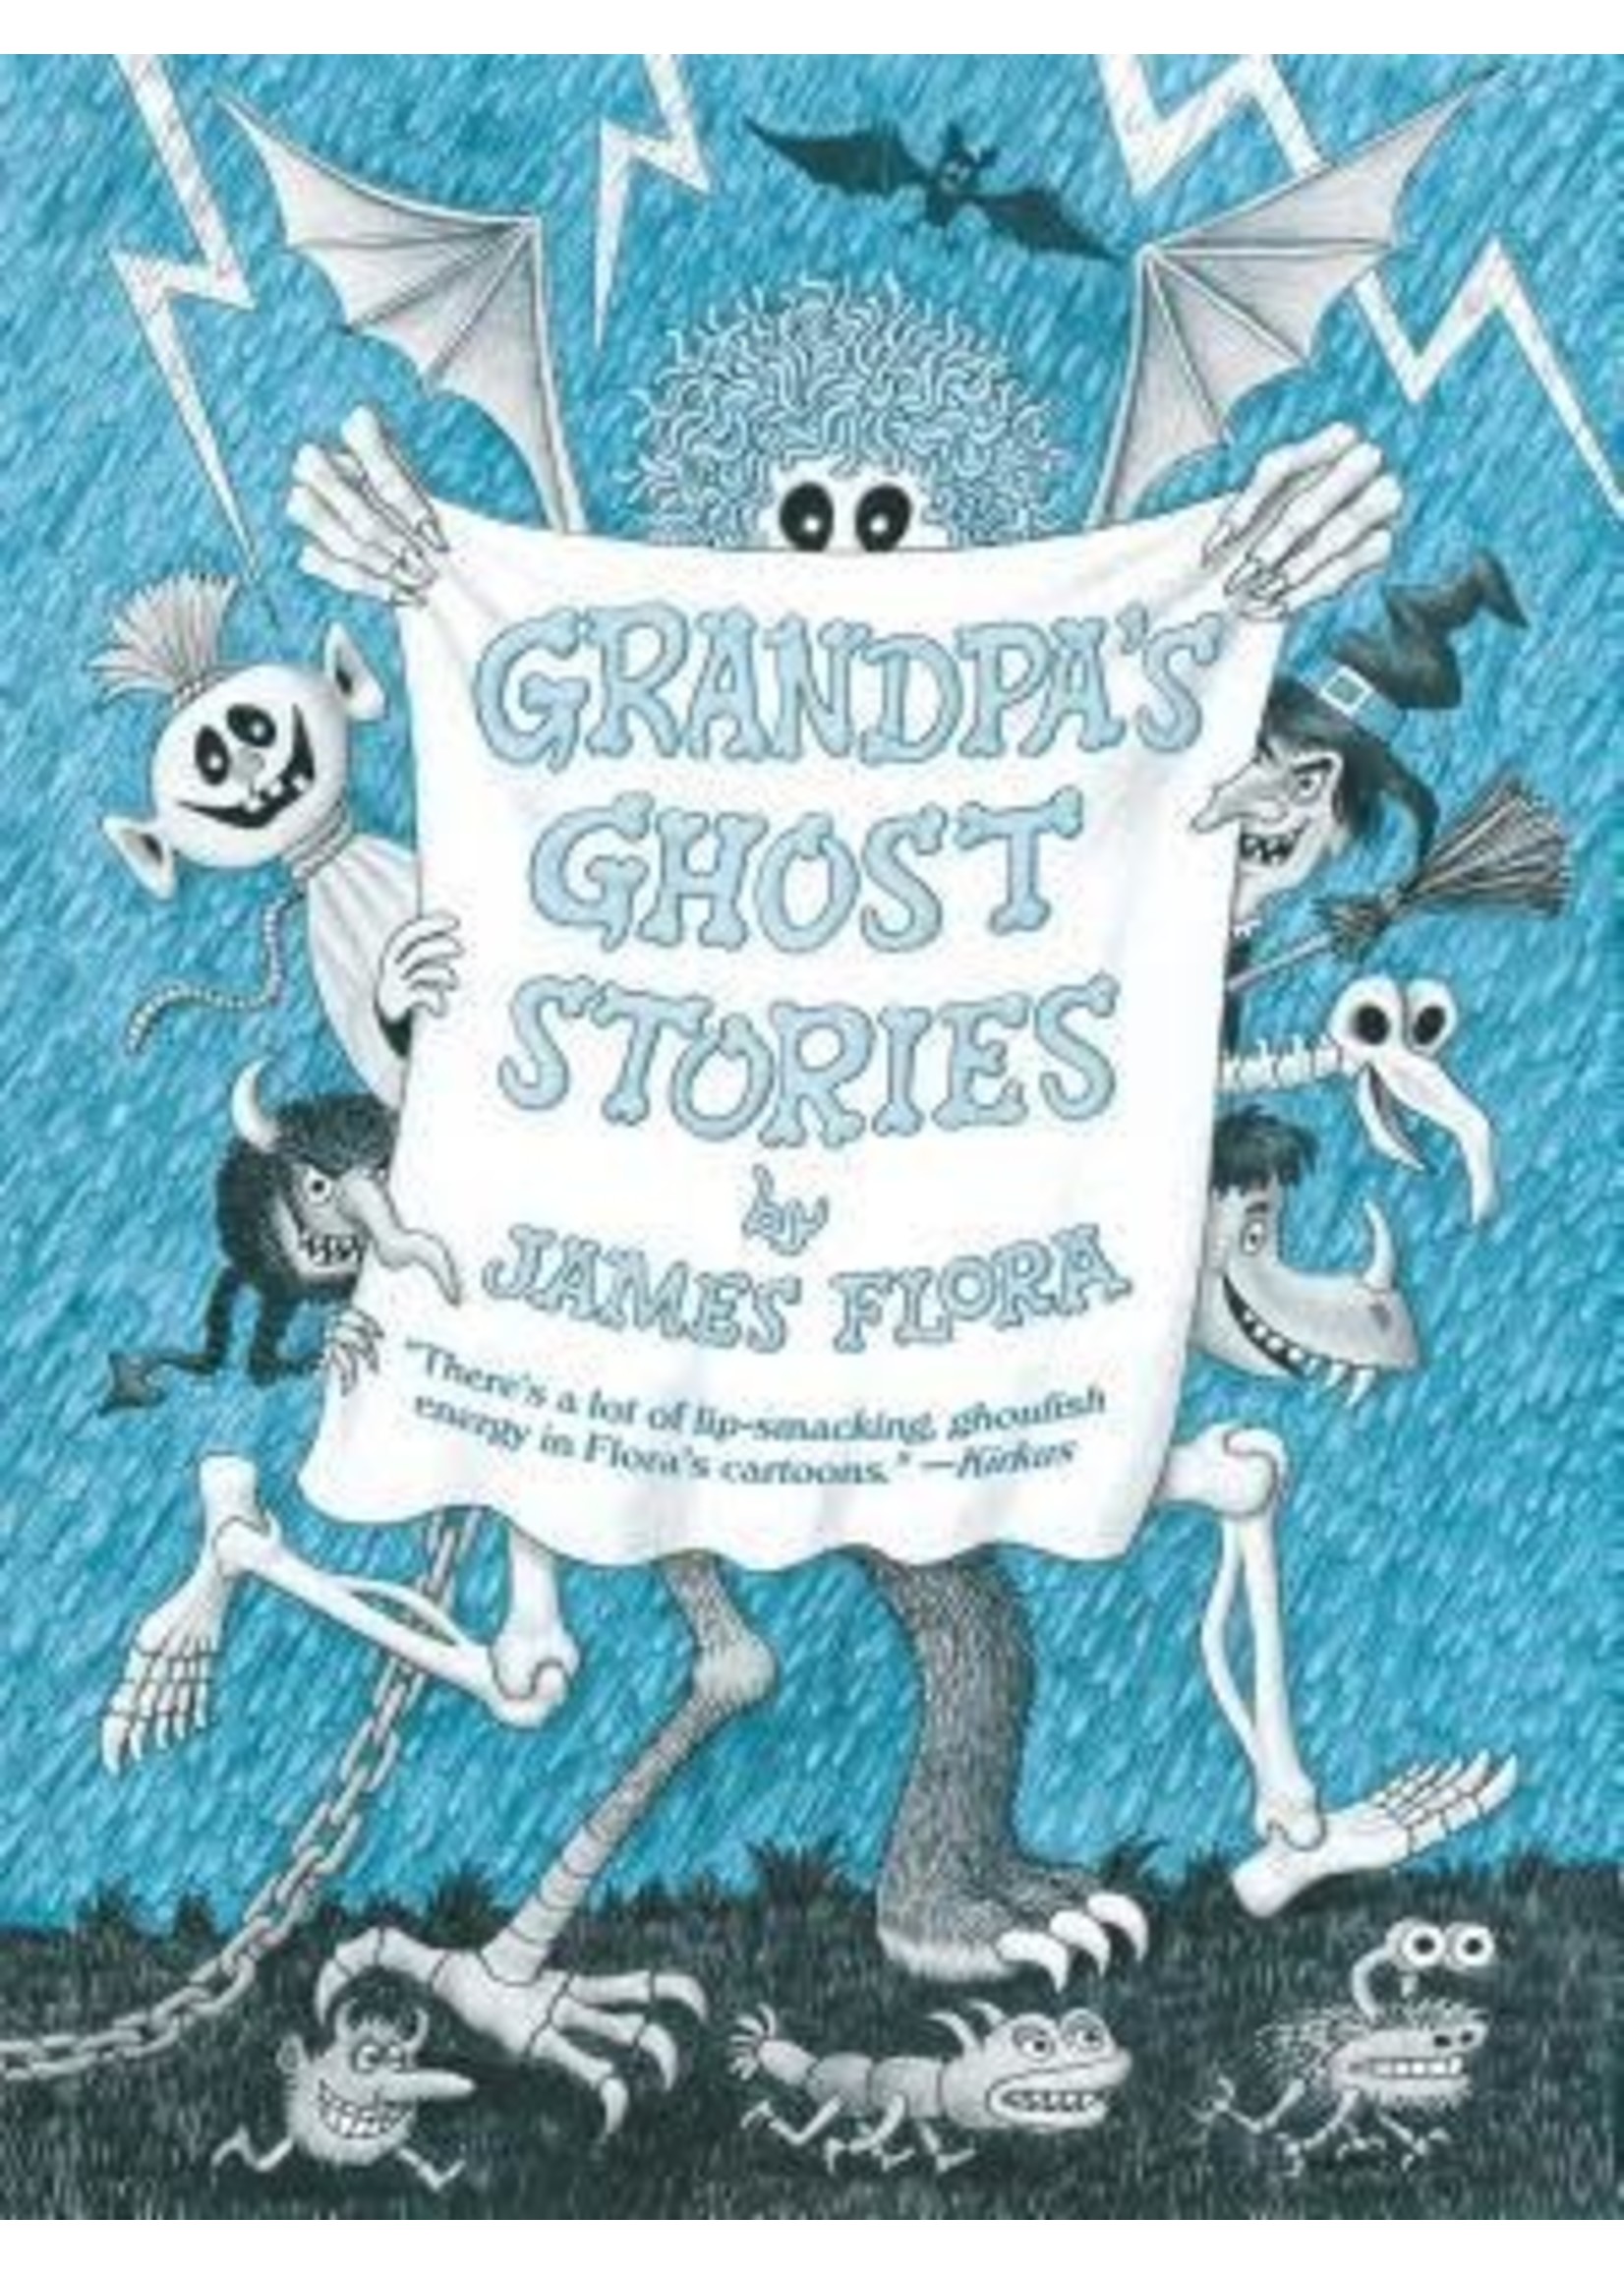 Grandpa's Ghost Stories by James Flora